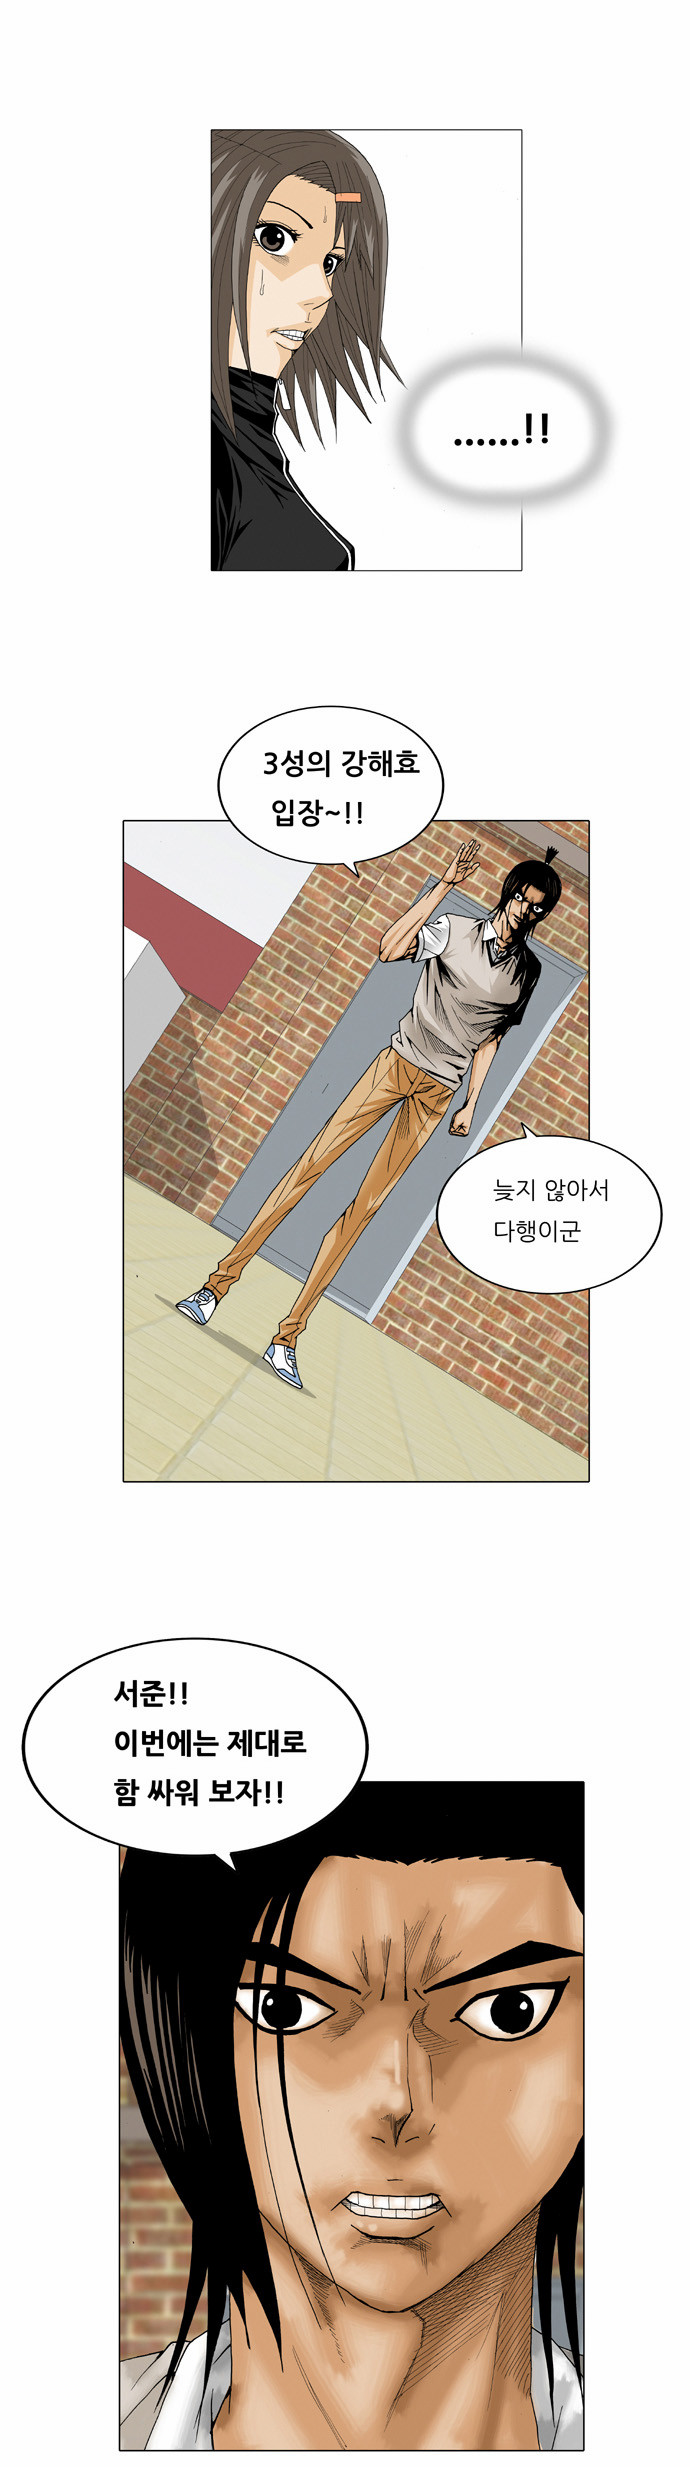 Ultimate Legend - Kang Hae Hyo - Chapter 21 - Page 24